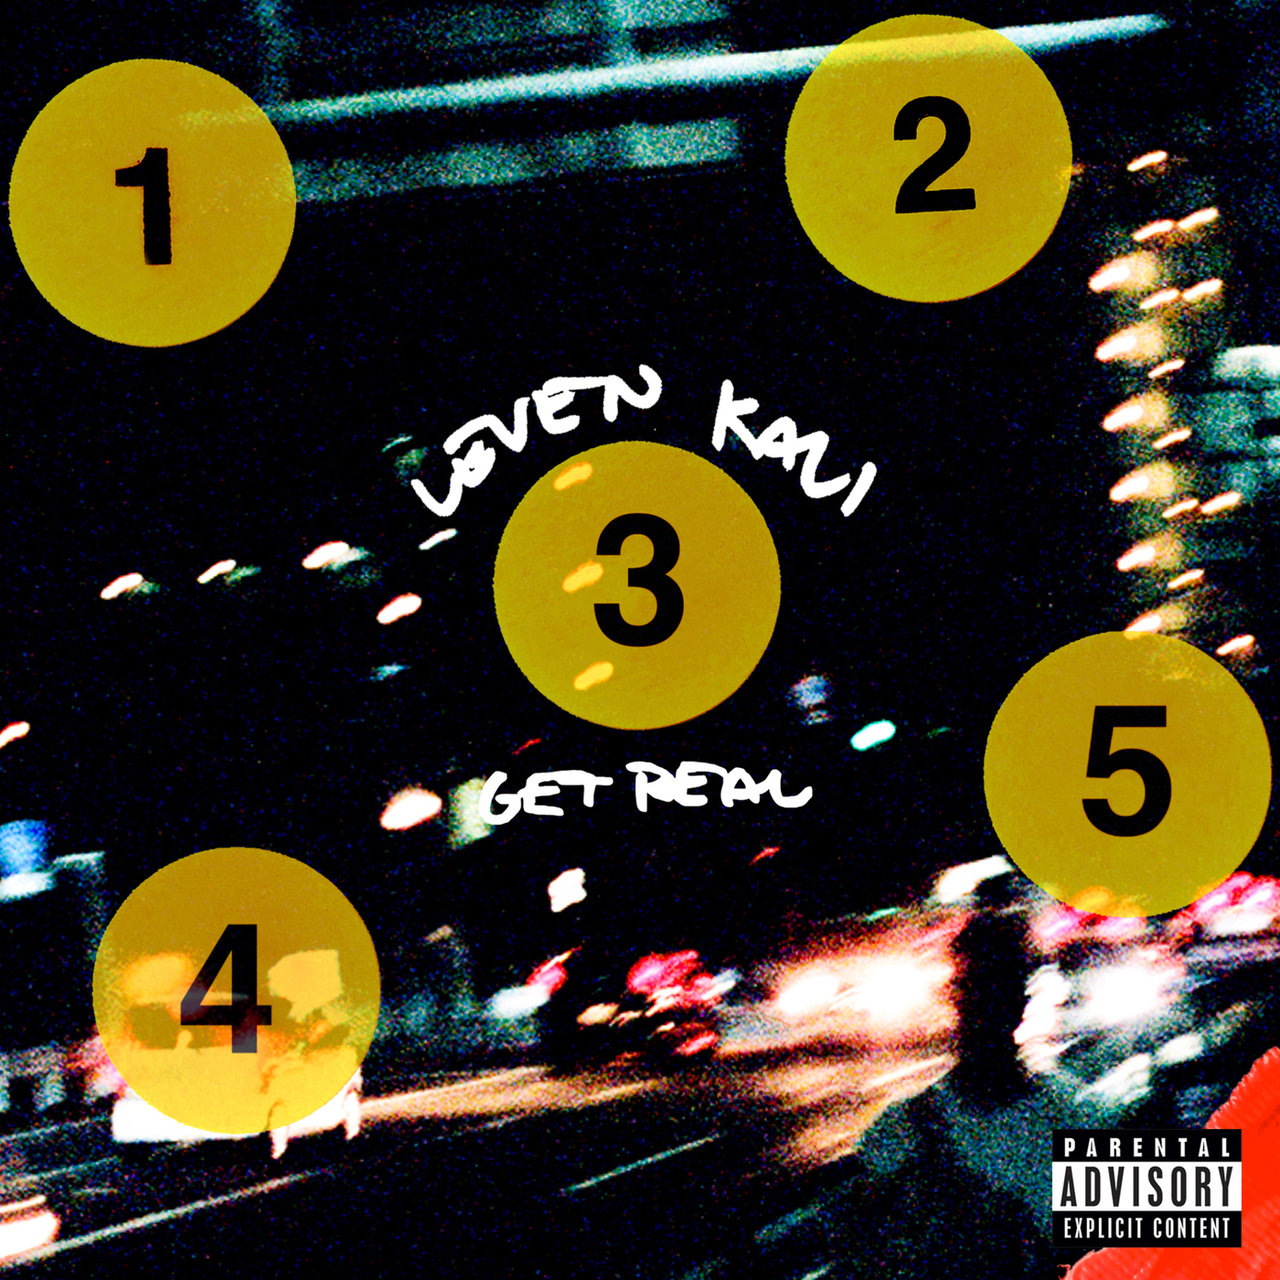 Leven Kali - 12345 (Get Real) (Cover)